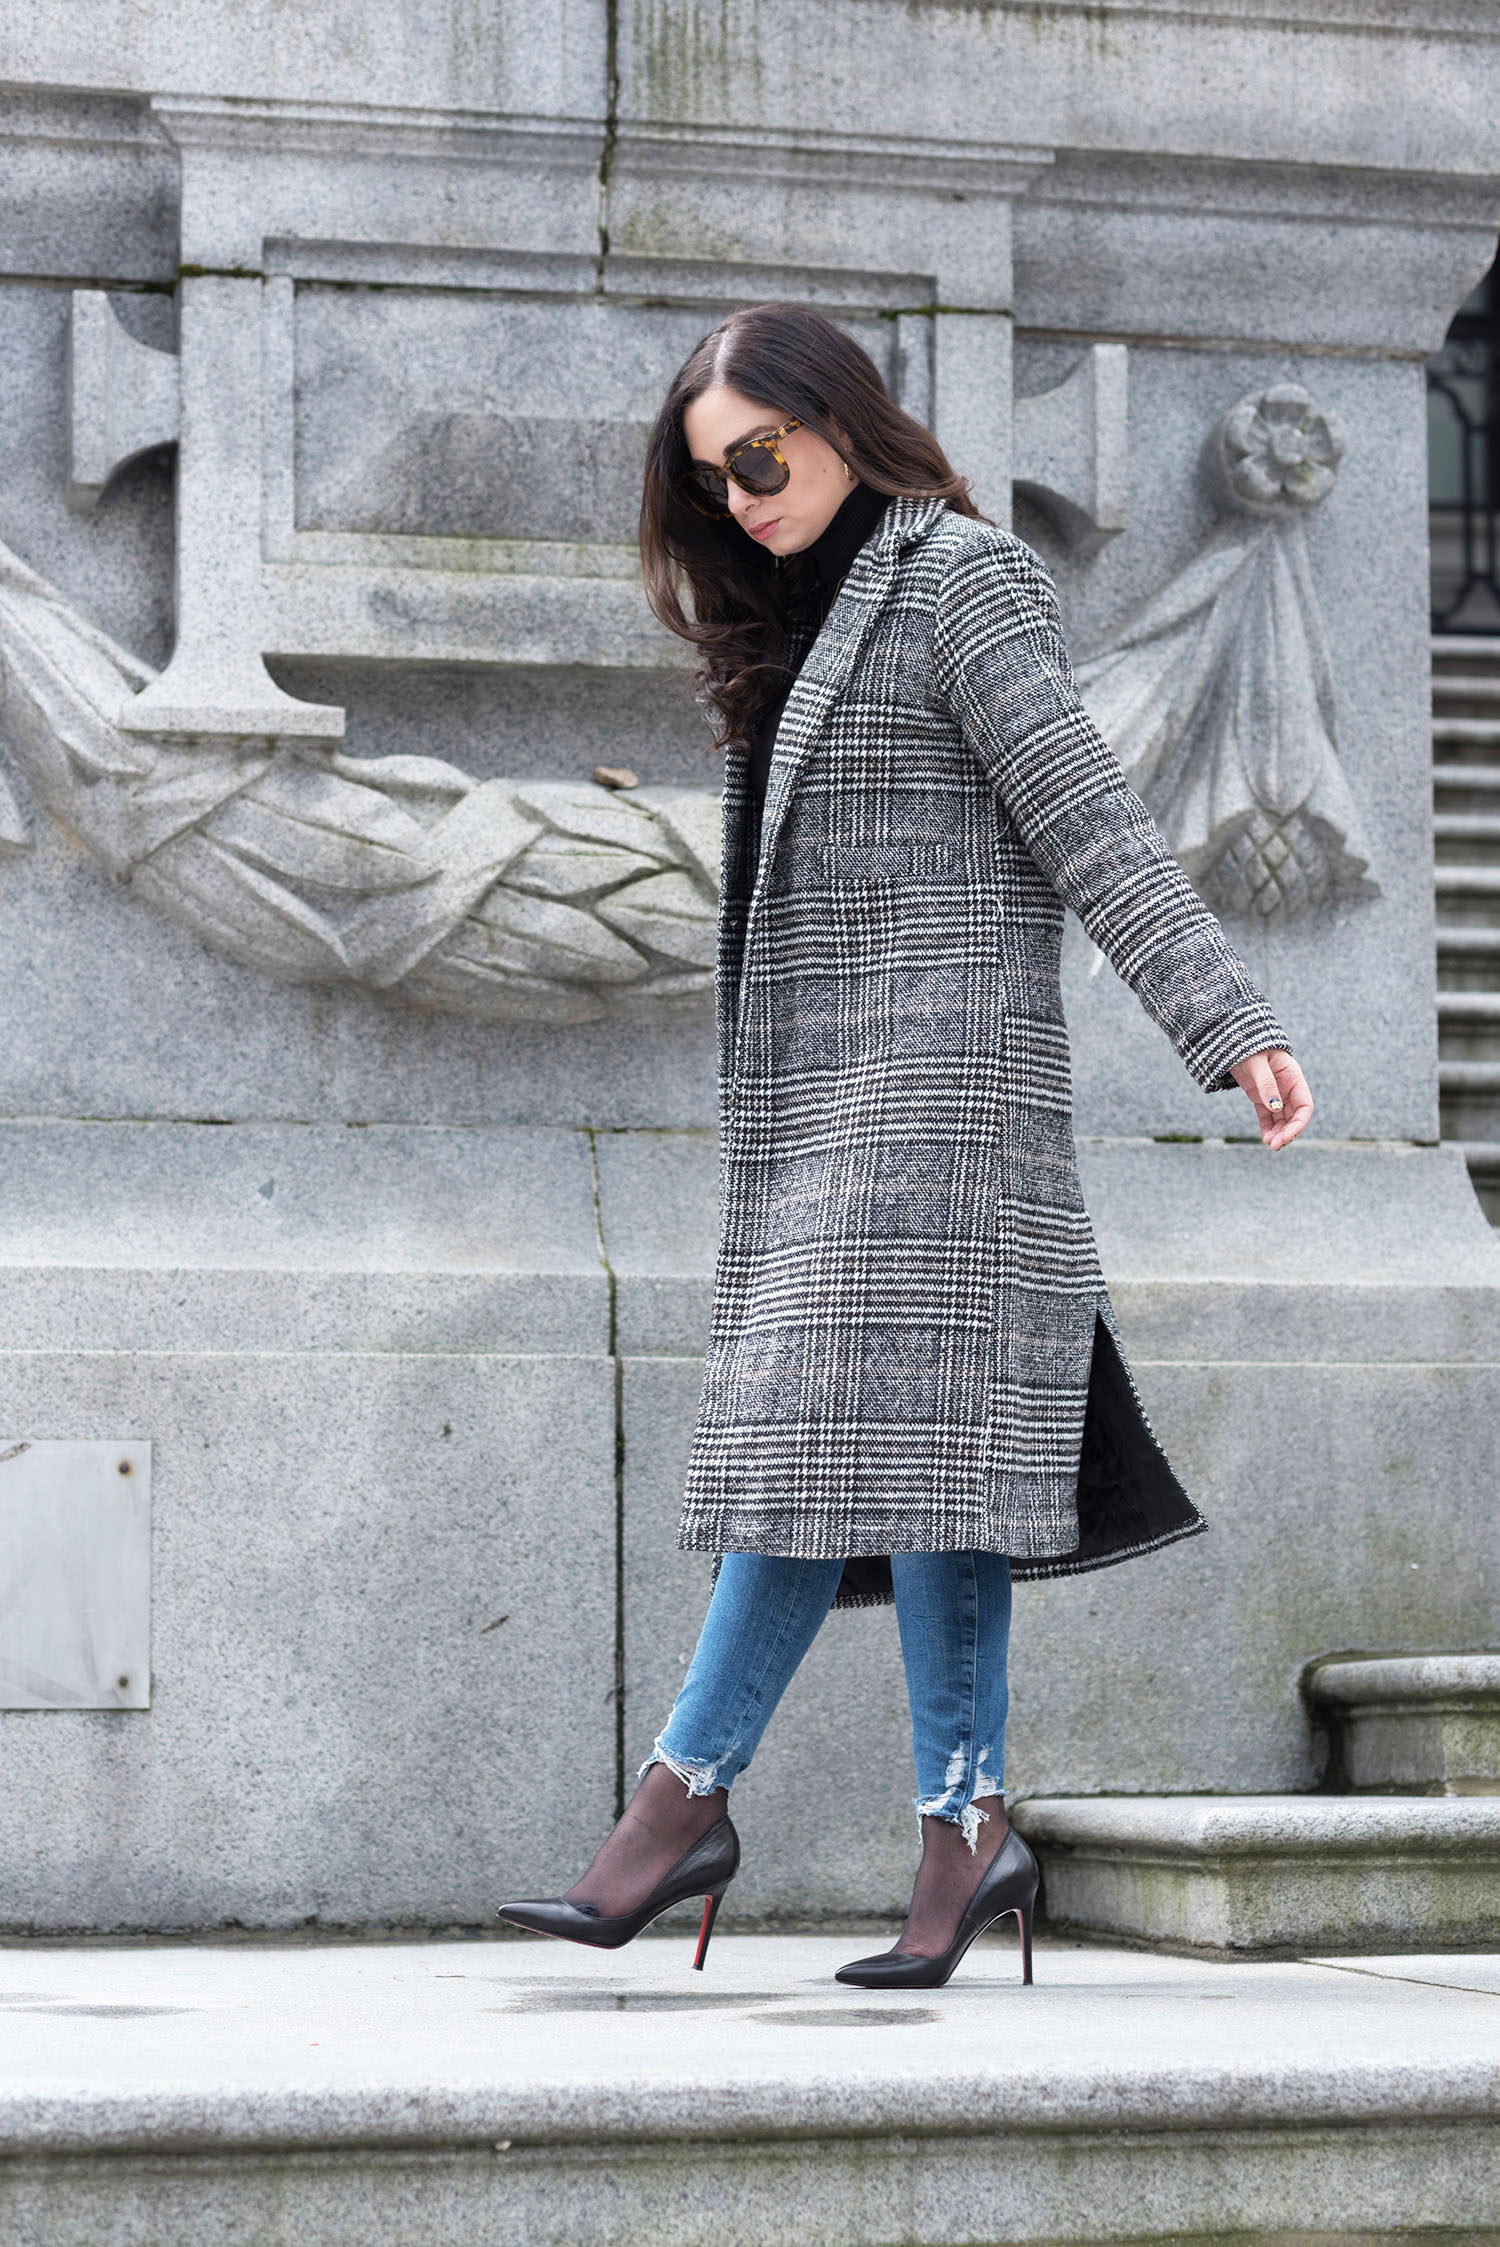 Fashion blogger Cee Fardoe of Coco & vera walks outside the Vancouver Art Gallery wearing a Sheinside coat and Christian Louboutin Pigalle pumps